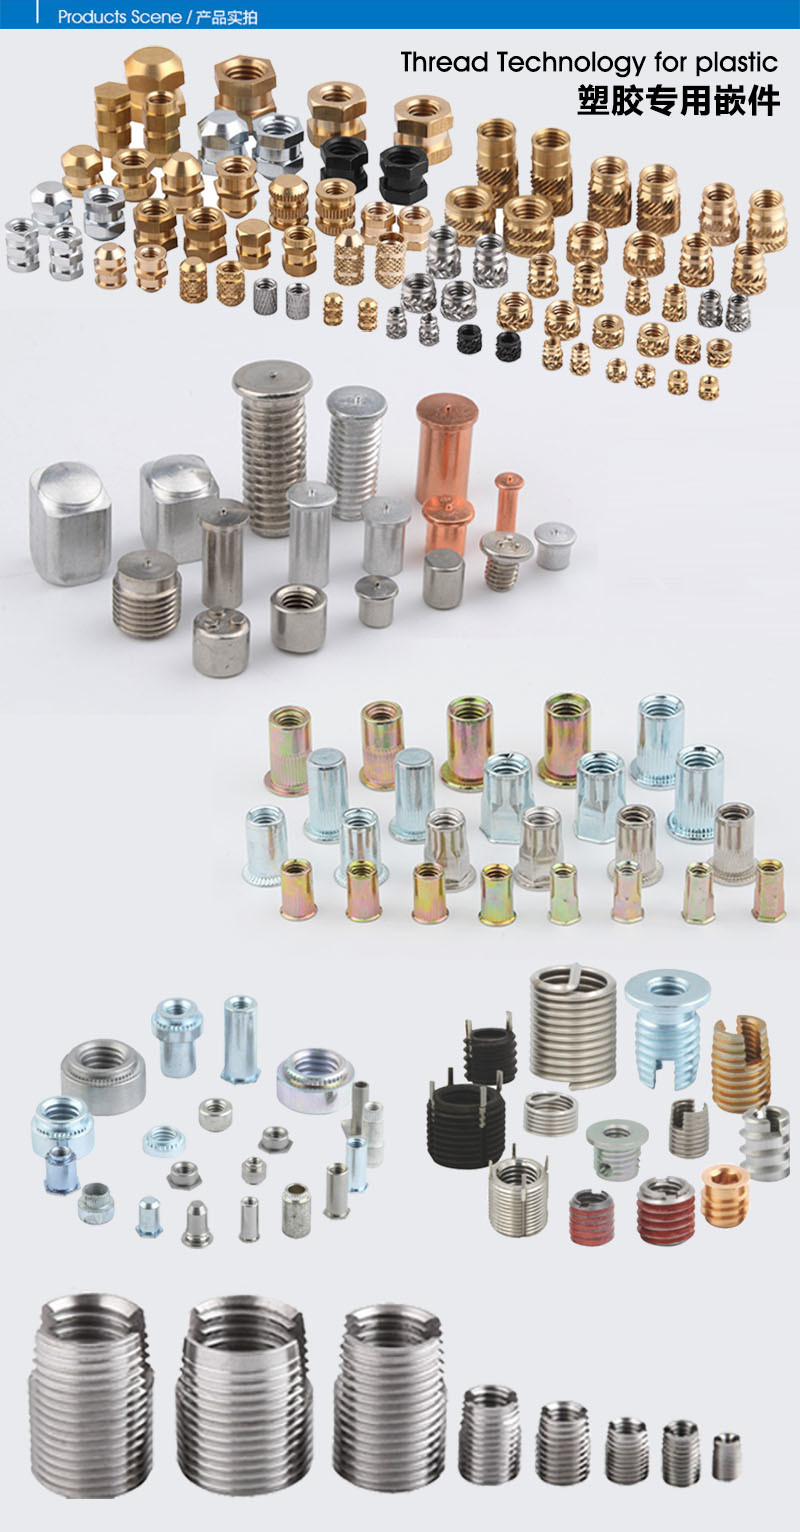 Cross Grooved Thread Cutting Tapping Anodized Bleed Screw